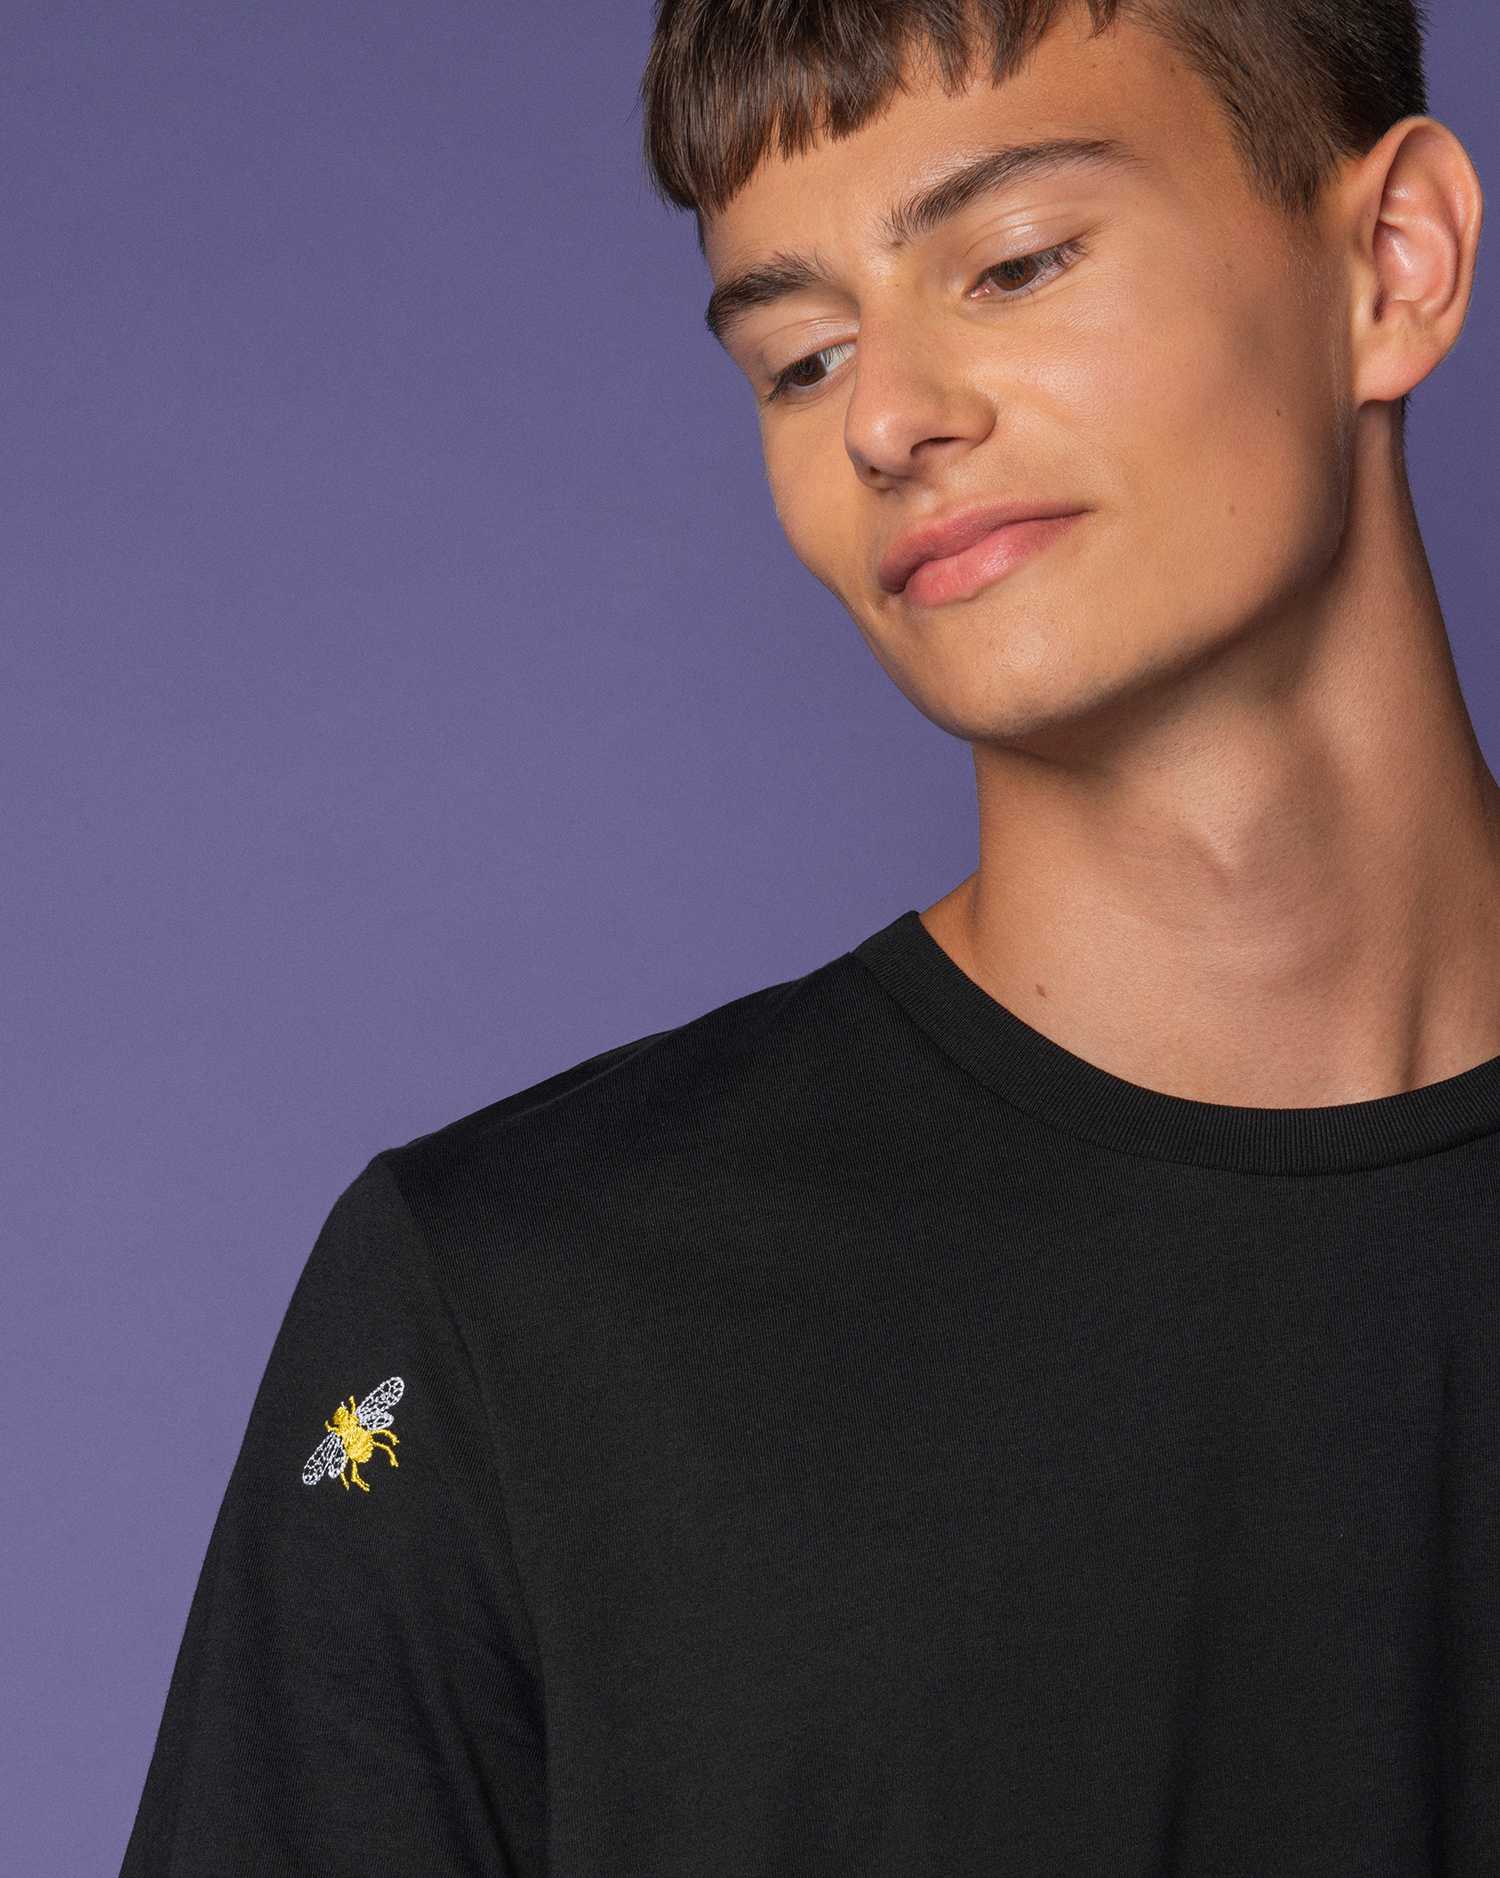 A man wearing a black tshirt with bees embroidered 